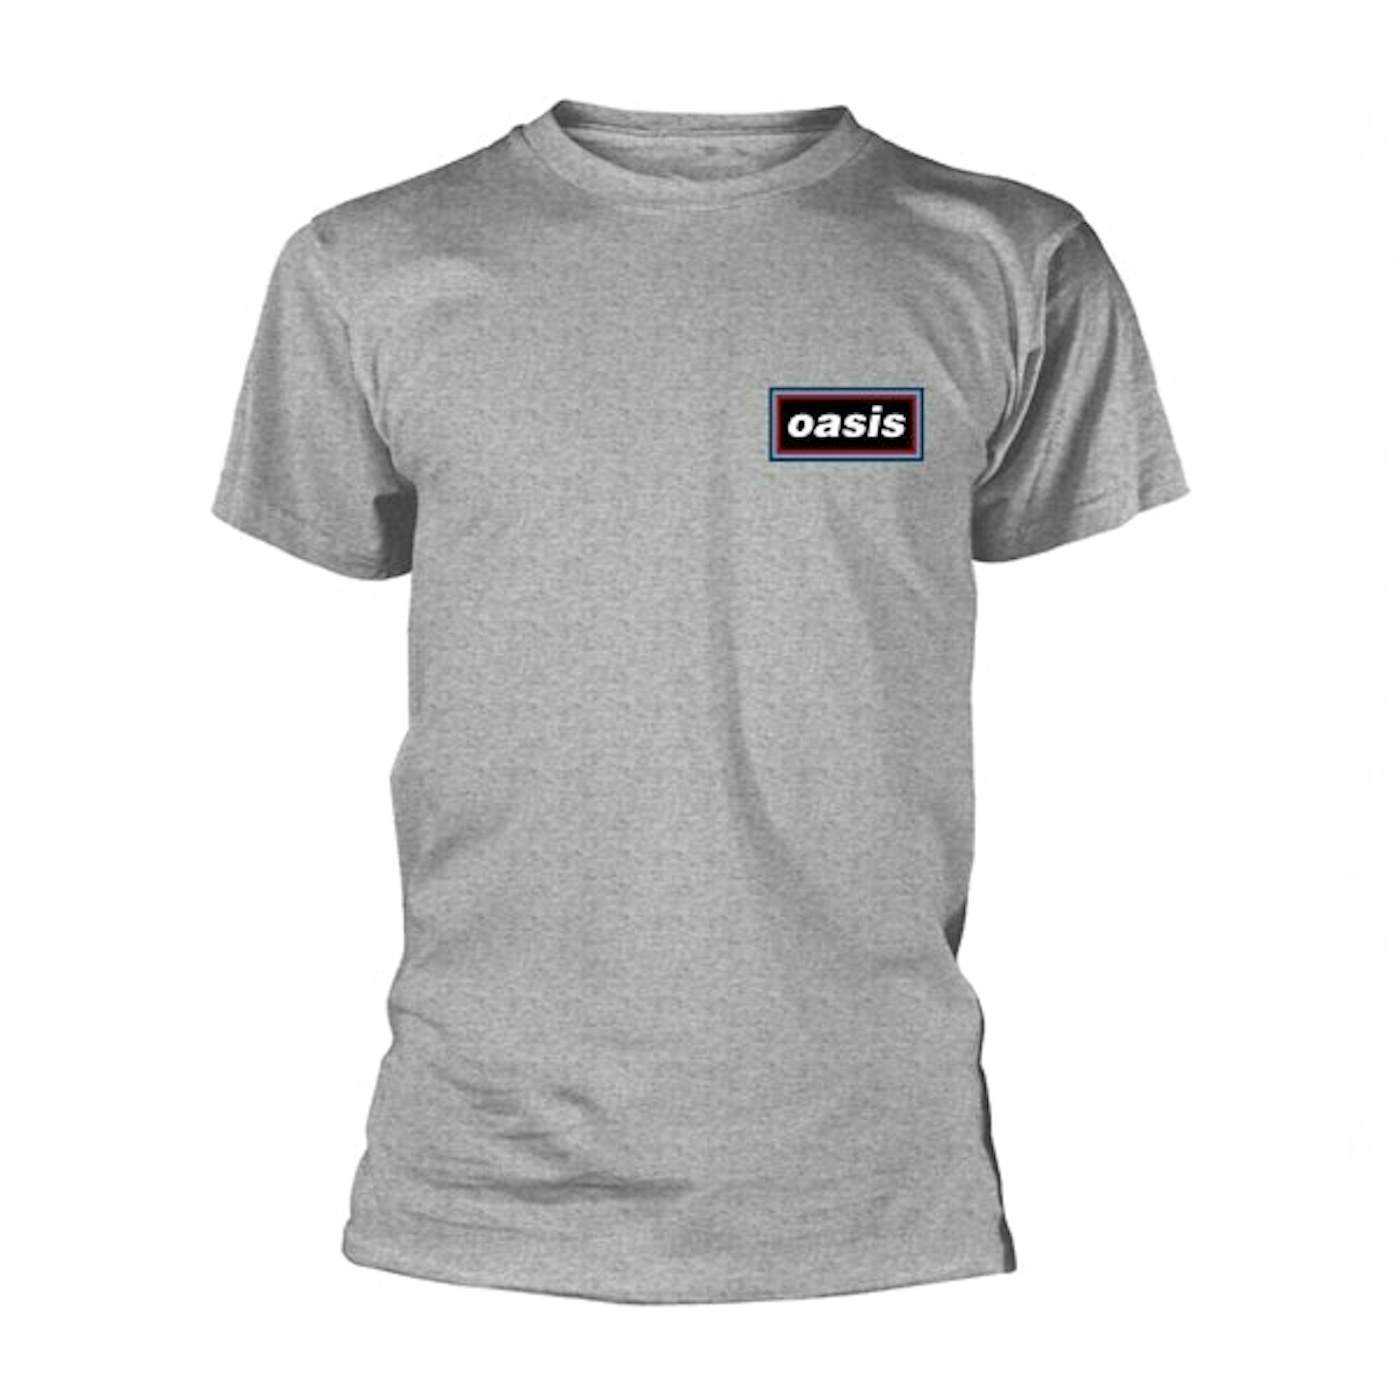 Oasis T Shirt - Lines (Grey)